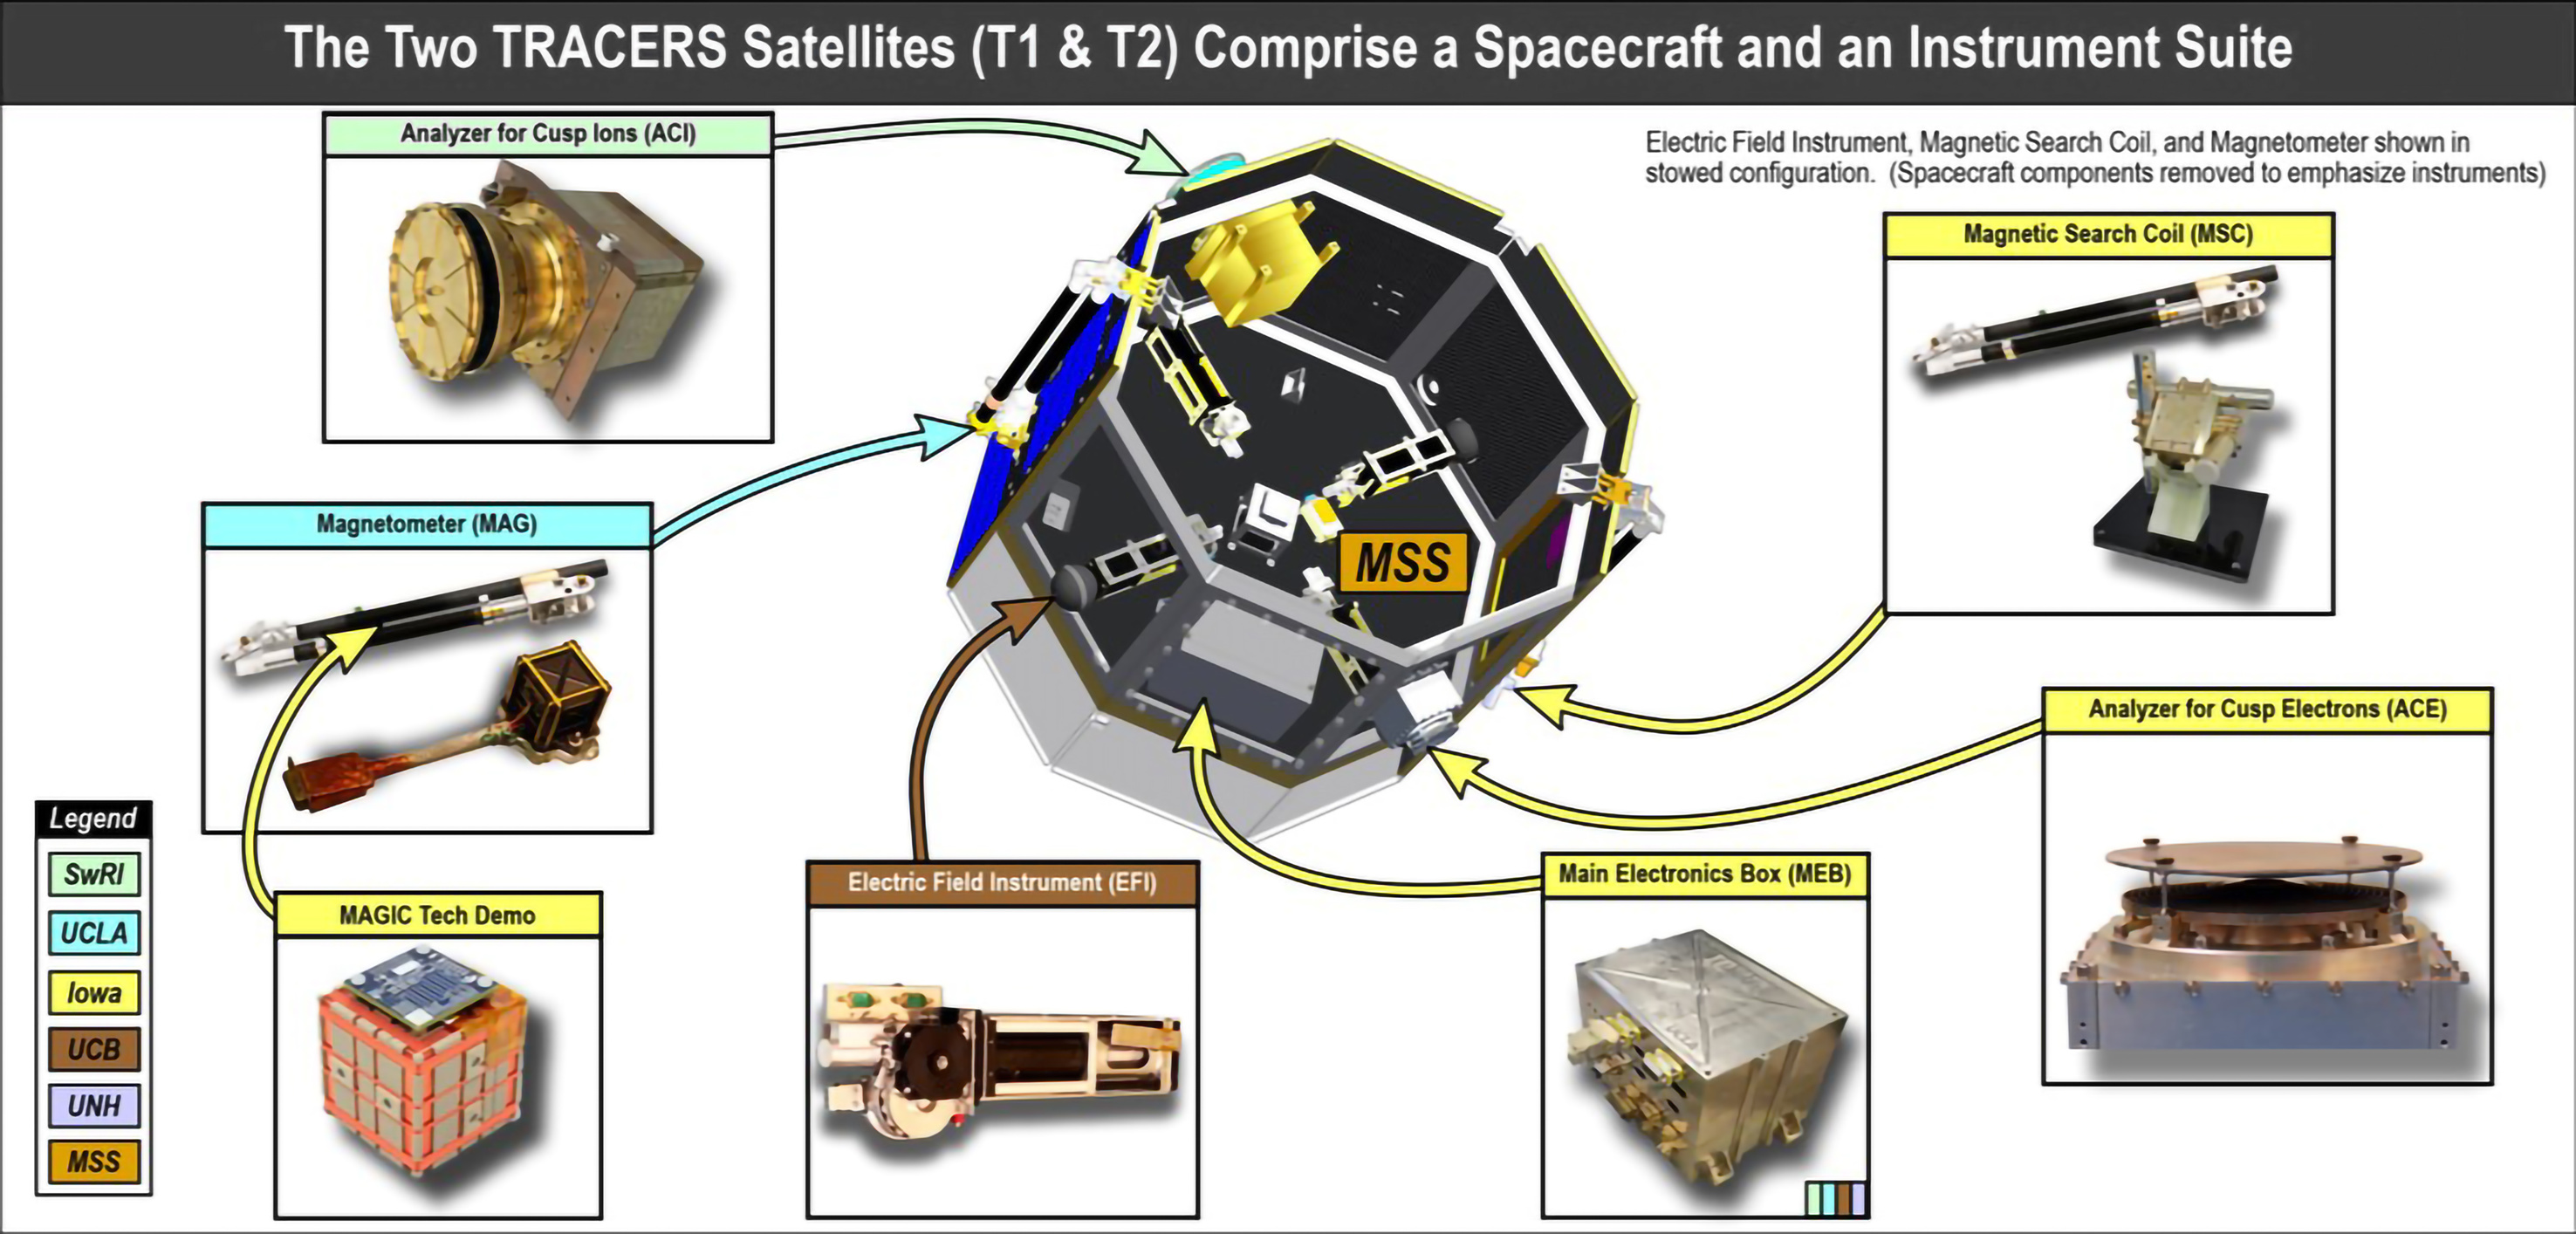 A graphic showing one of the spacecraft in stowed configuration with some elements removed to better show the instruments. Each instrument is also shown individually with arrows pointing to their location on the spacecraft.